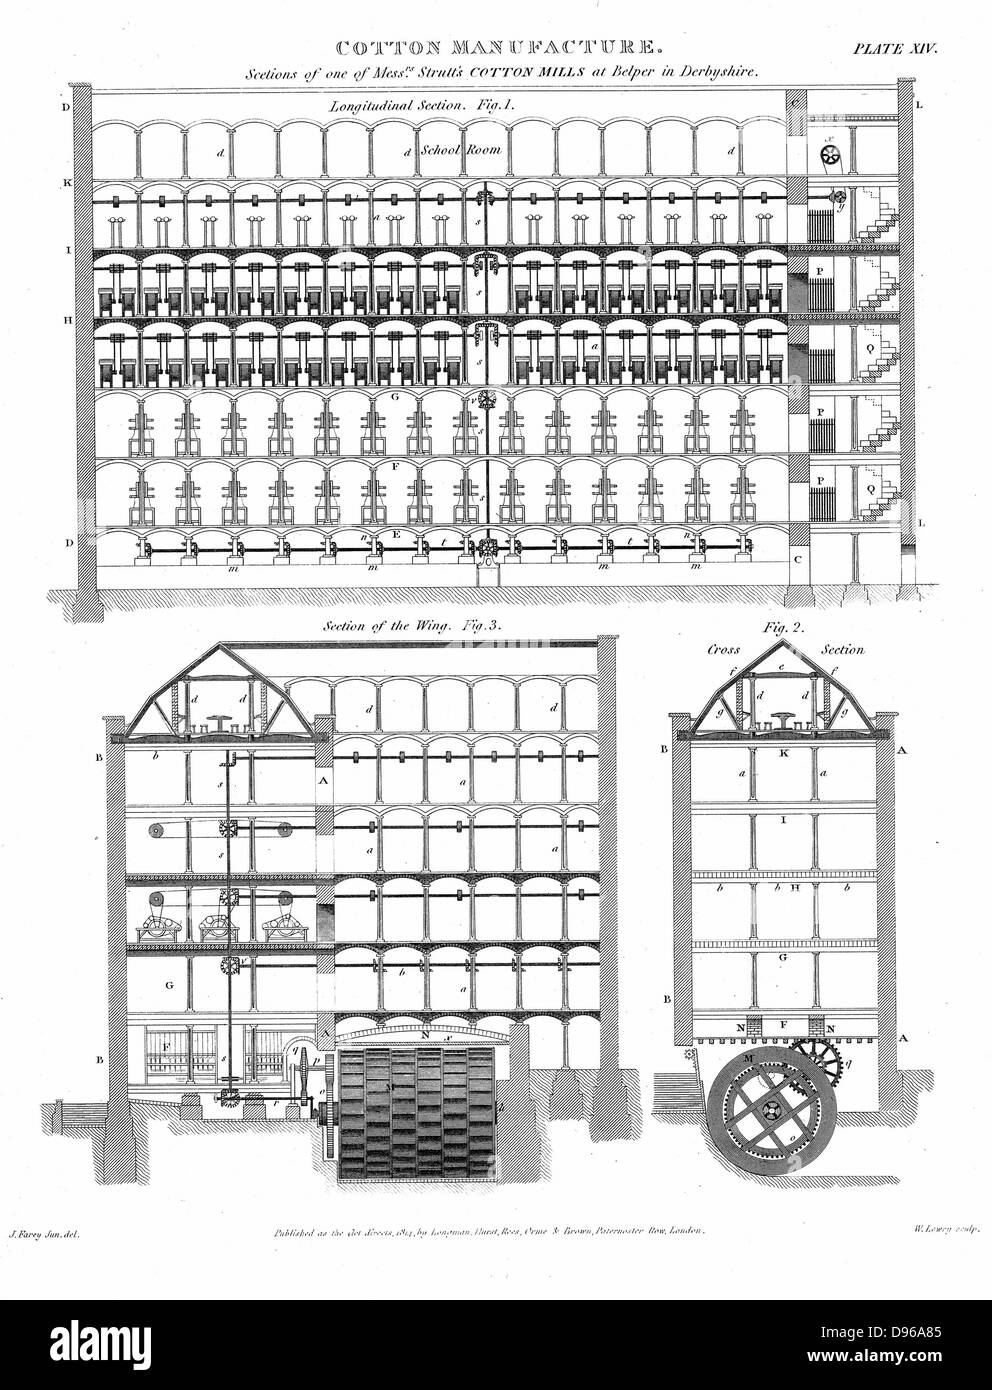 Sectional view of Strutt's model cotton mills, Belper, Derbyshire, England. Water wheel and power distribution via shaft and belting. Water frames are at F, carding machines above. Schoolroom at top of building. Copperplate engraving 1820 Stock Photo